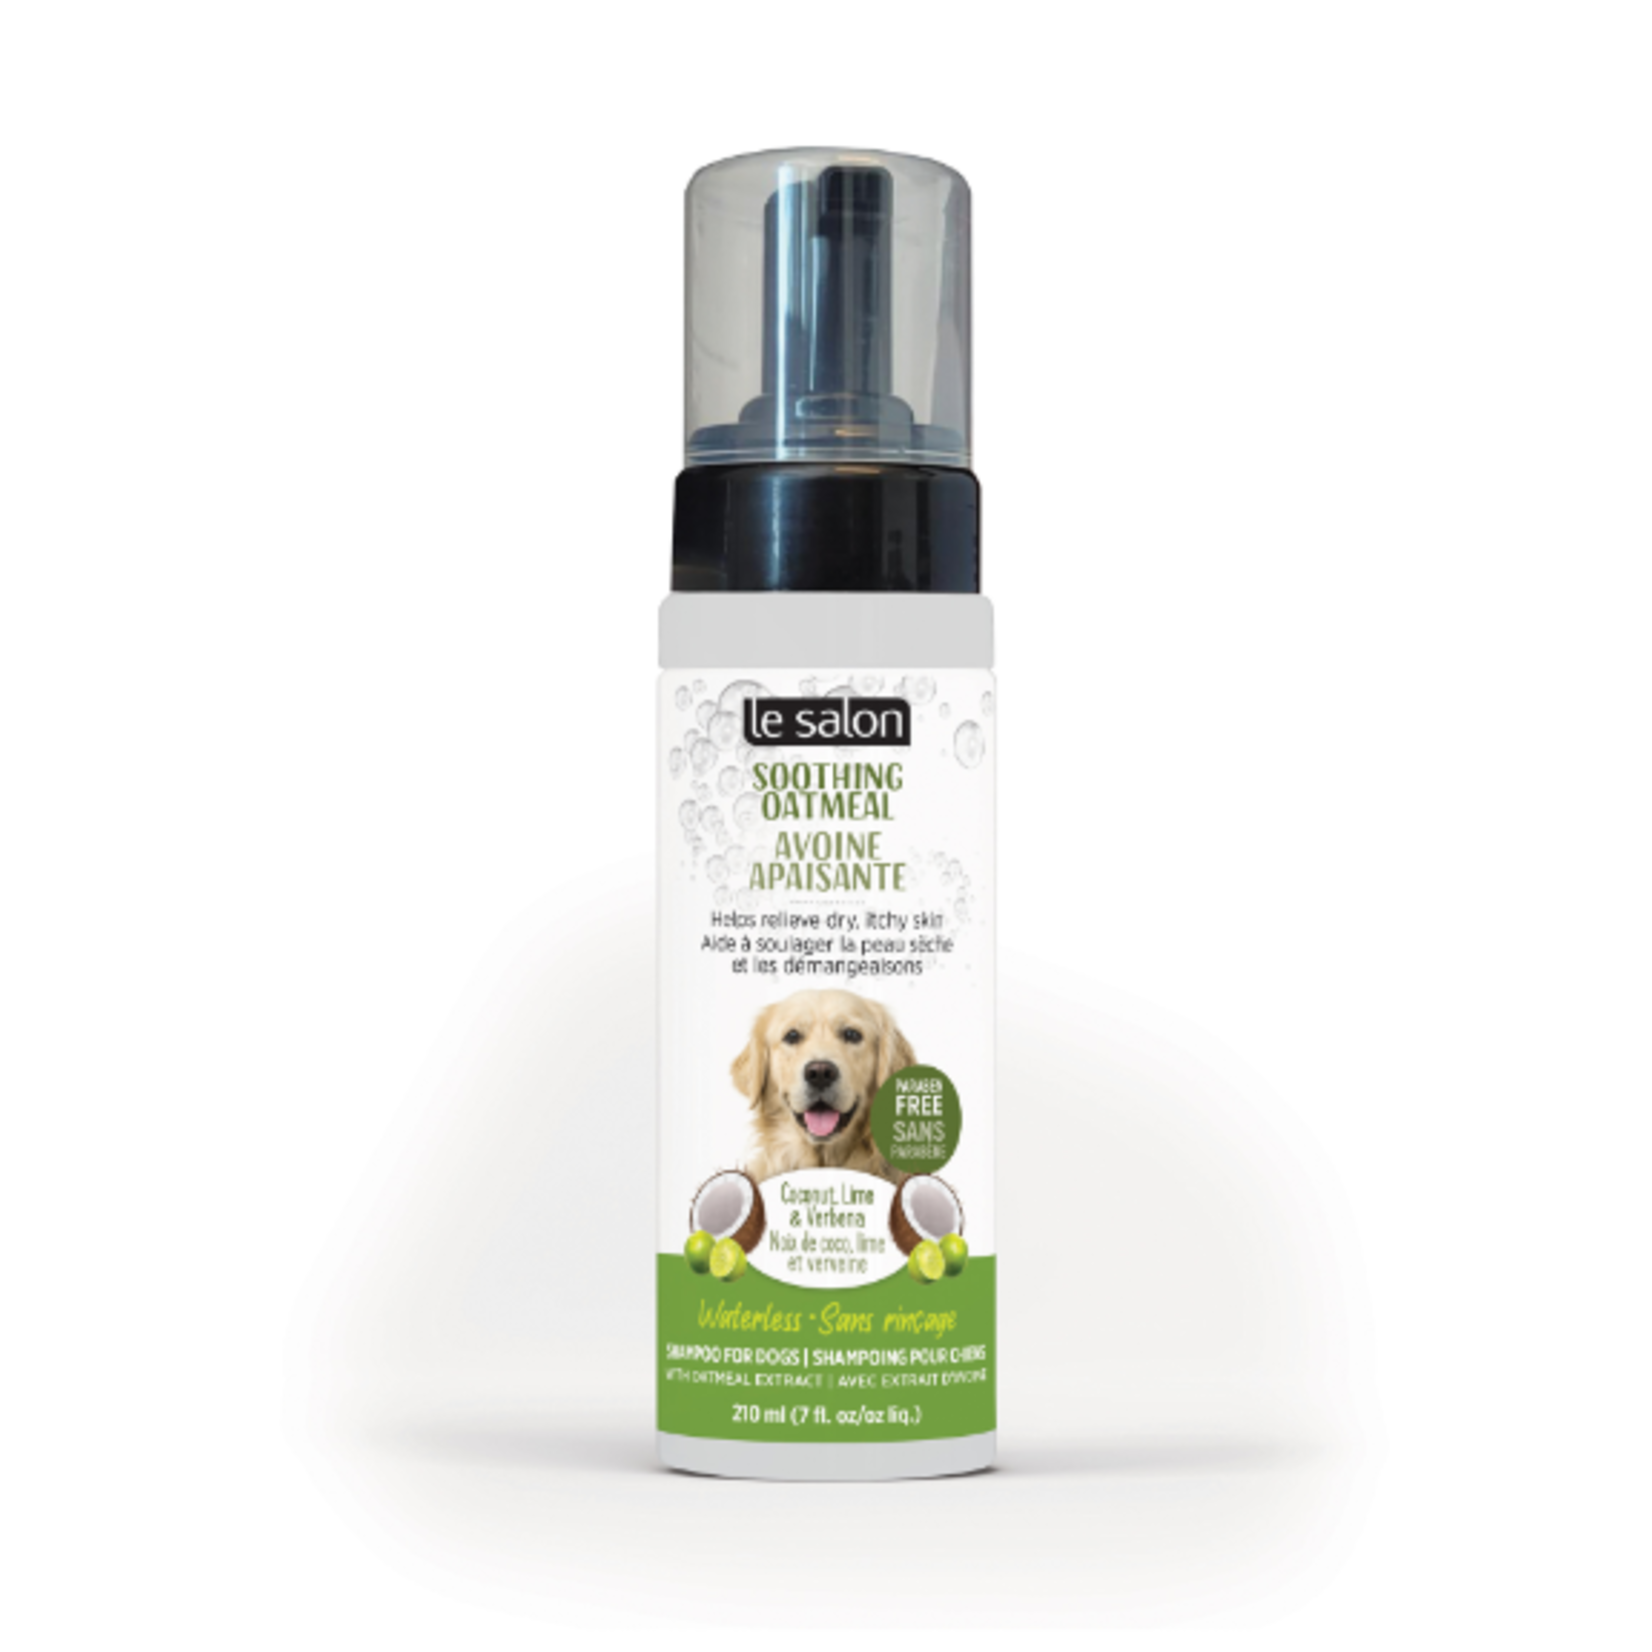 Le Salon Soothing Oatmeal - Waterless Shampoo for Dogs - 210 ml